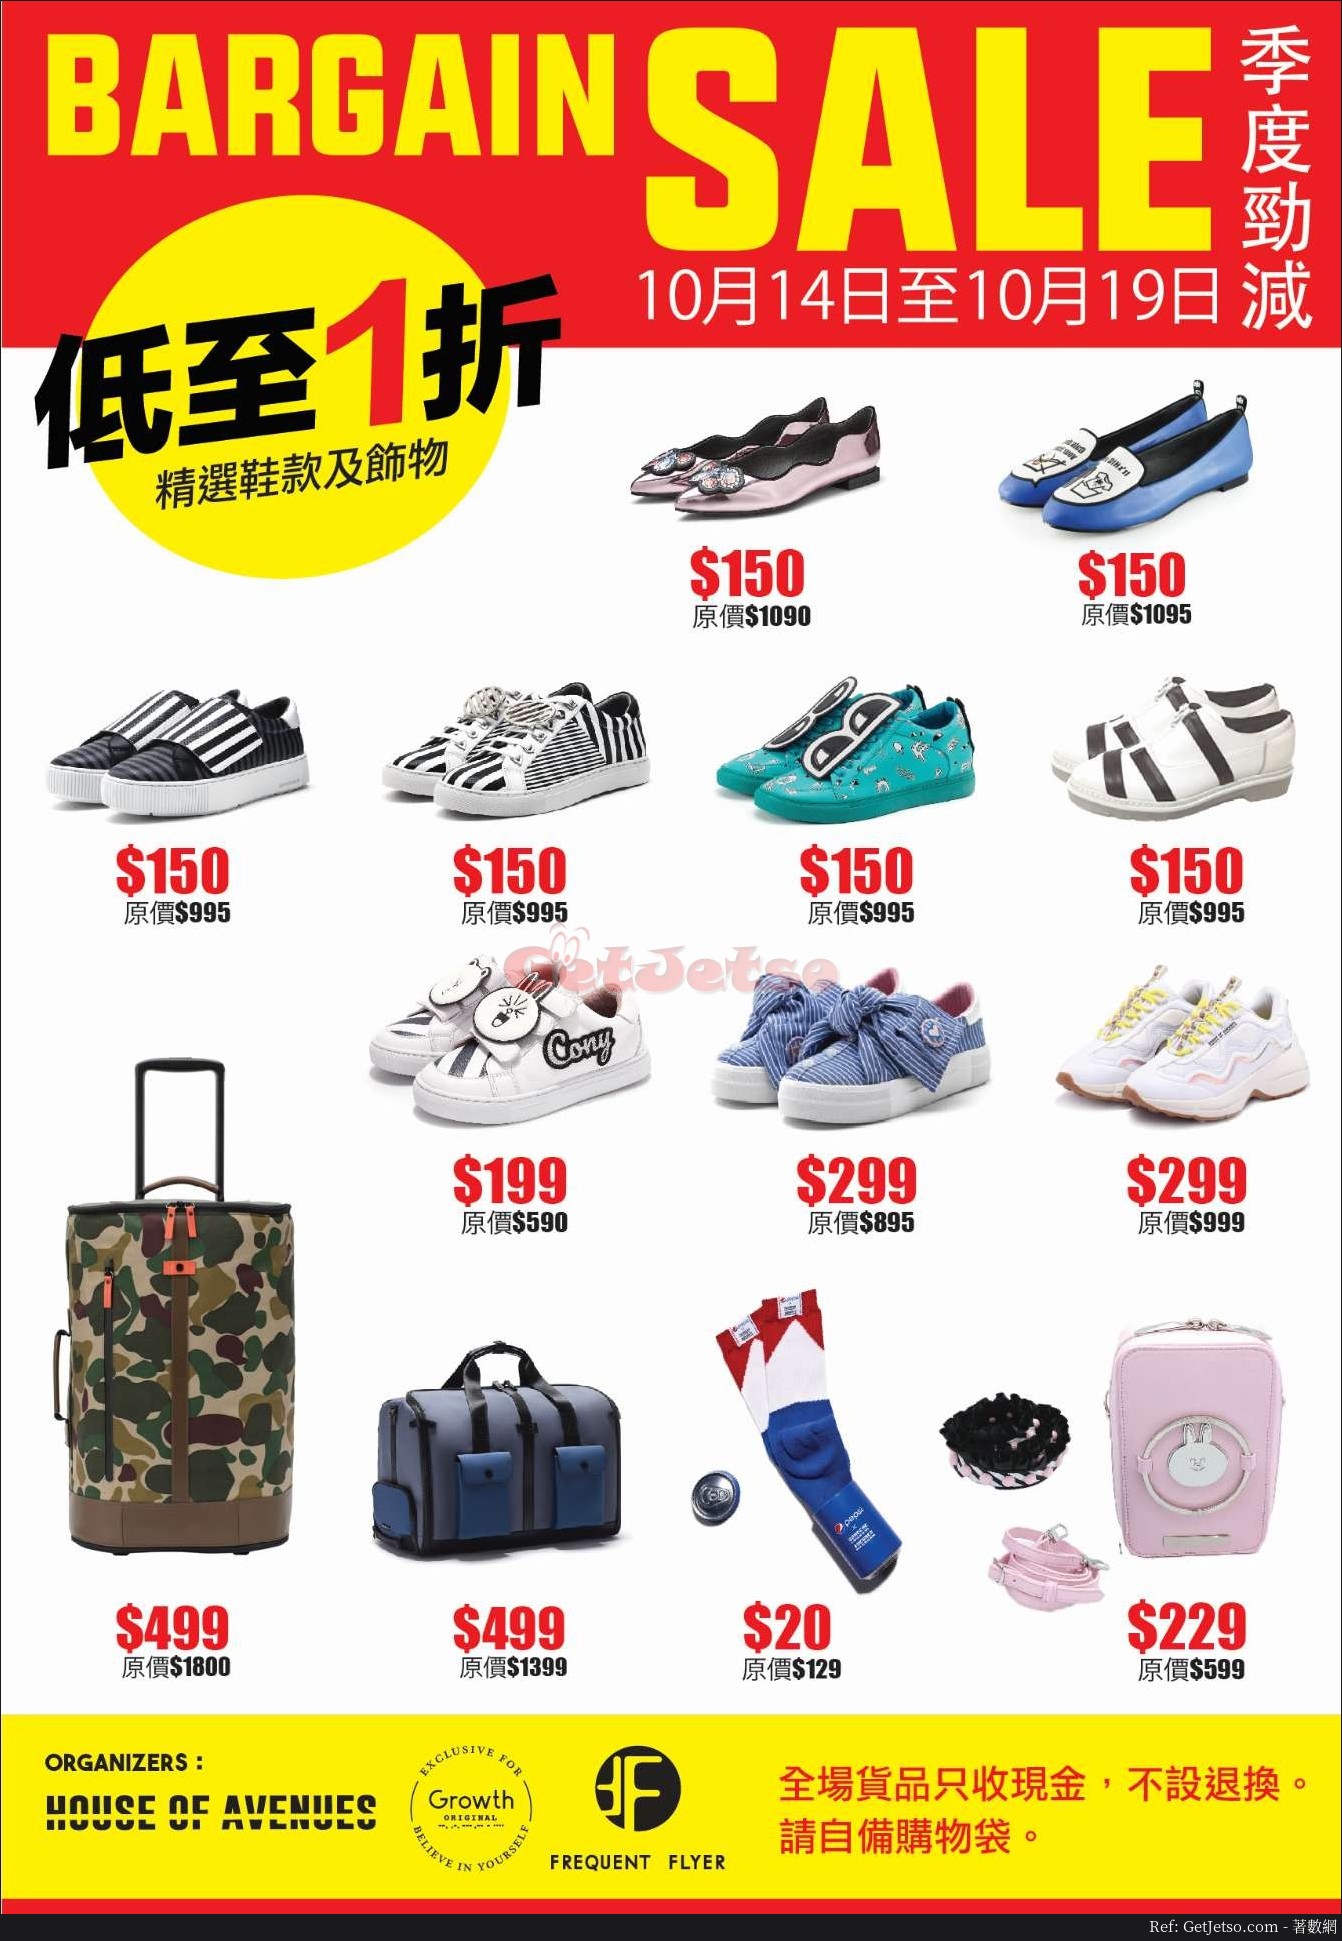 House of Avenues x Growth x Frequent Flyer 低至1折開倉優惠(19年10月14-19日)圖片2